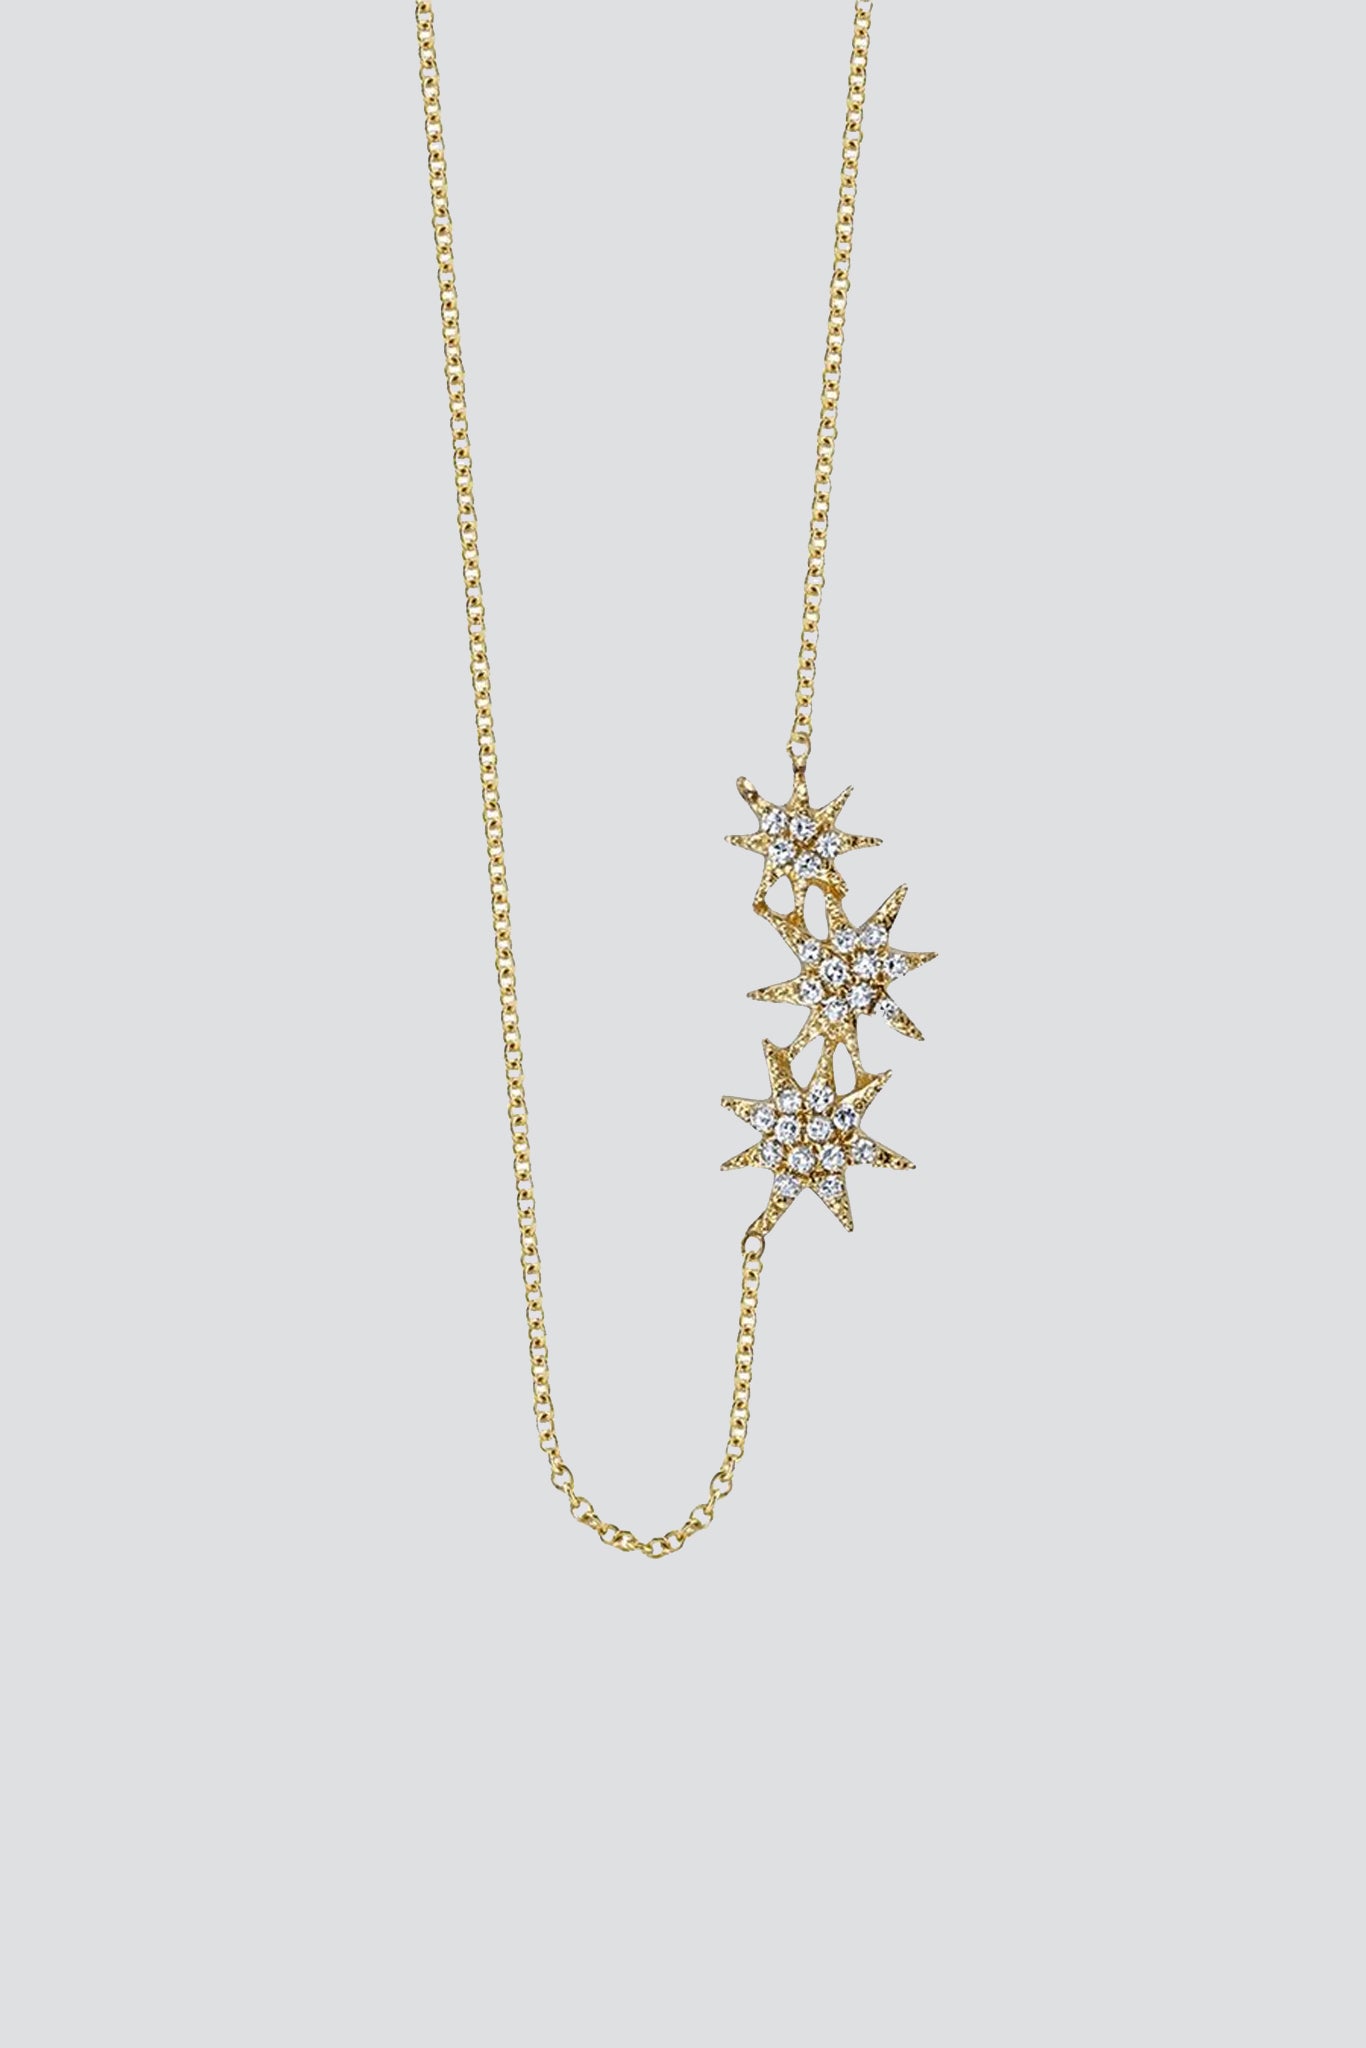 14k Gold Triple Shooting Star Necklace